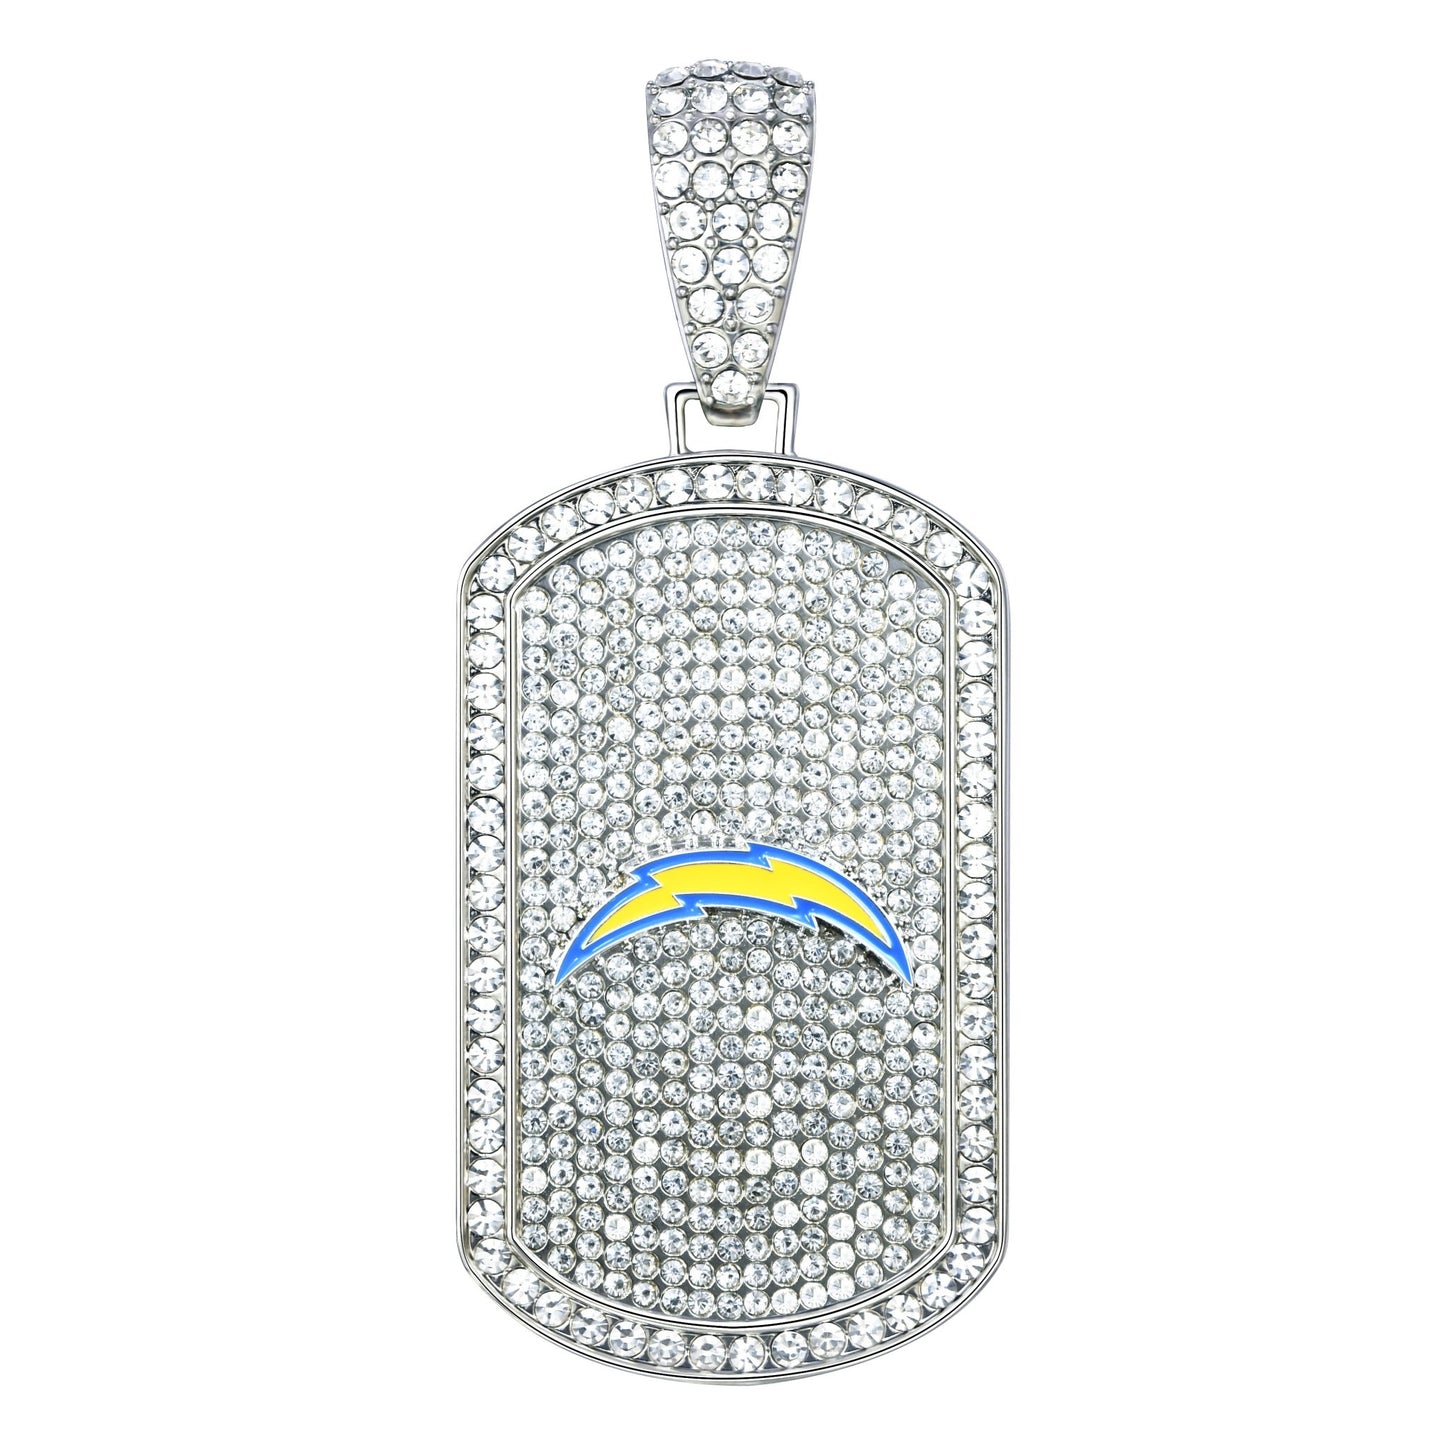 NFL Bling Dog Tag Necklace - Gamedays Gear - Los Angeles Chargers